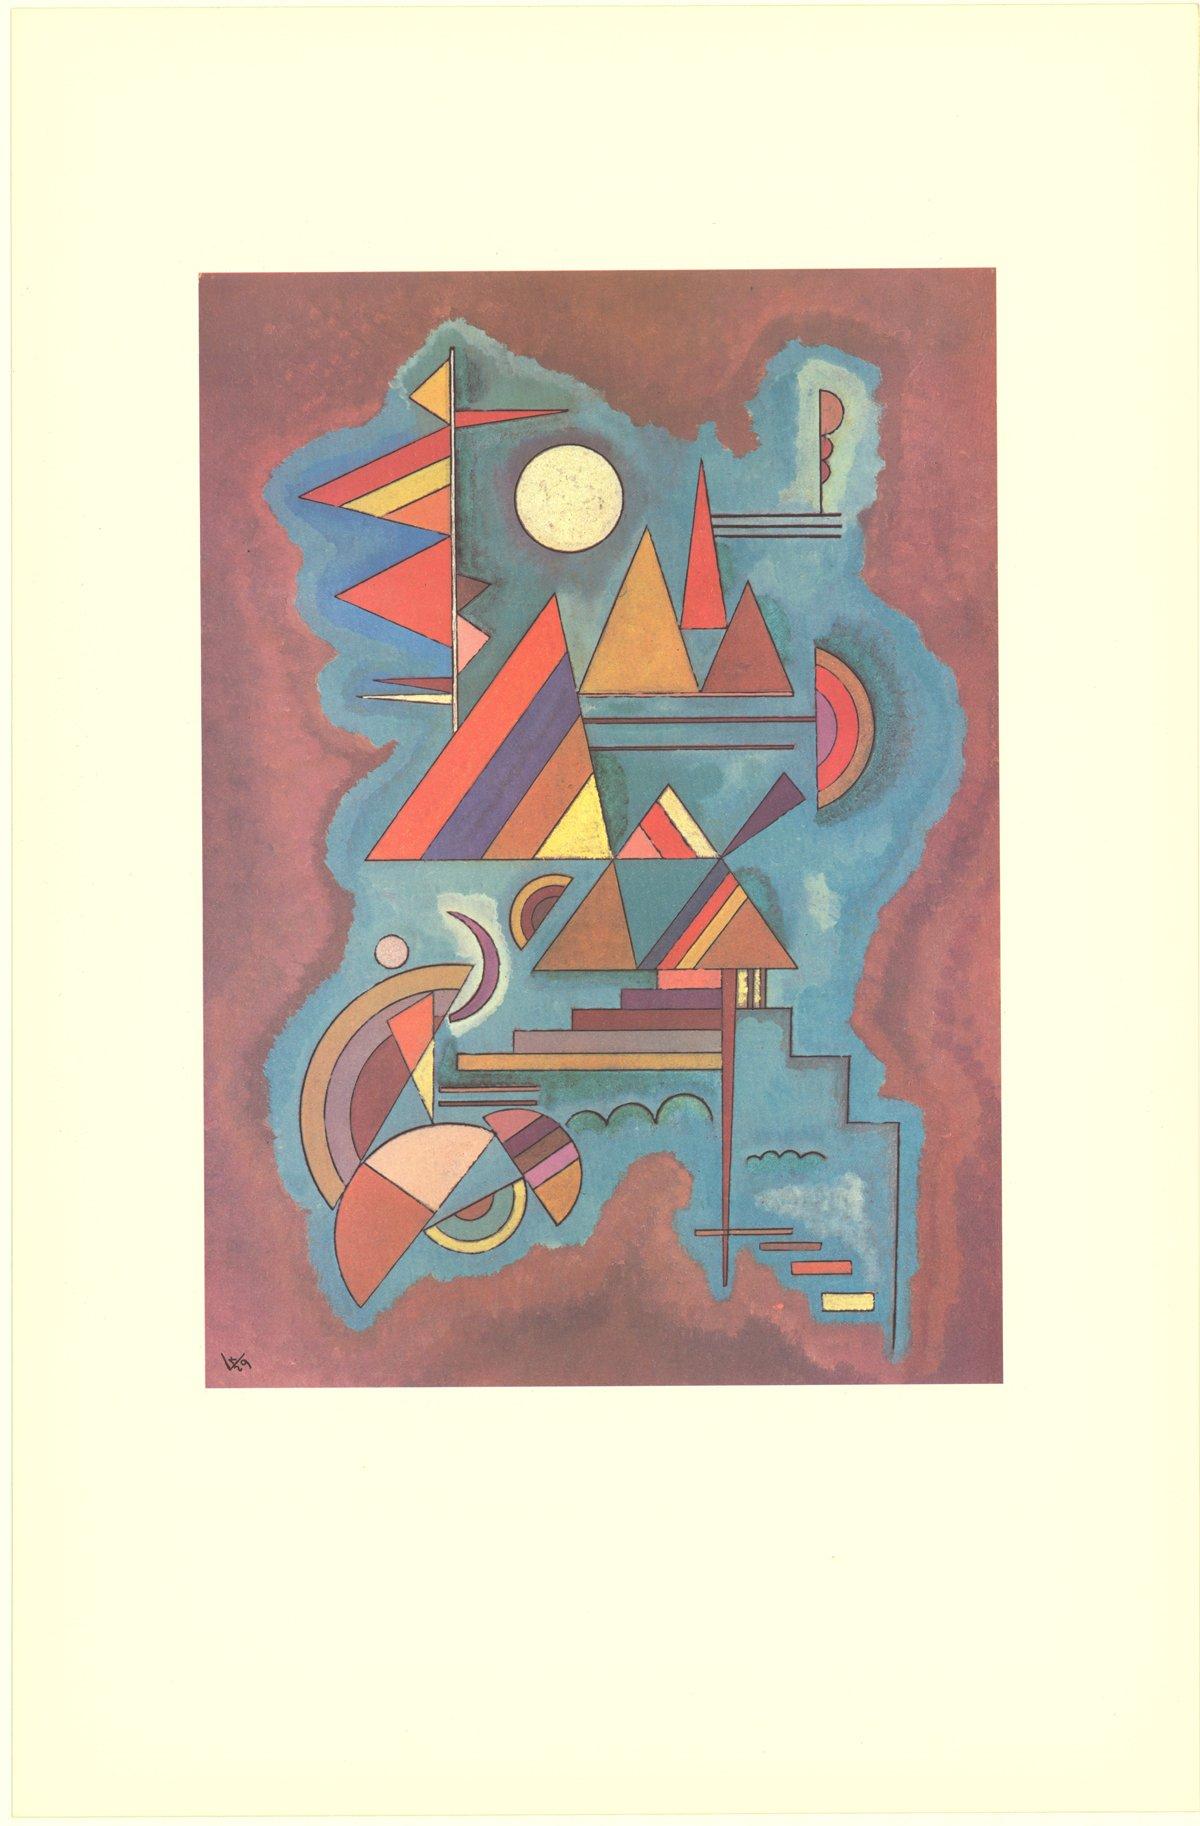 Paper Size: 22.25 x 15.75 inches ( 56.515 x 40.005 cm )
 Image Size: 13.75 x 10 inches ( 34.925 x 25.4 cm )
 Framed: No
 Condition: A: Mint
 
 Additional Details: Colorful composition of shapes with sharp lines that appear softened by the